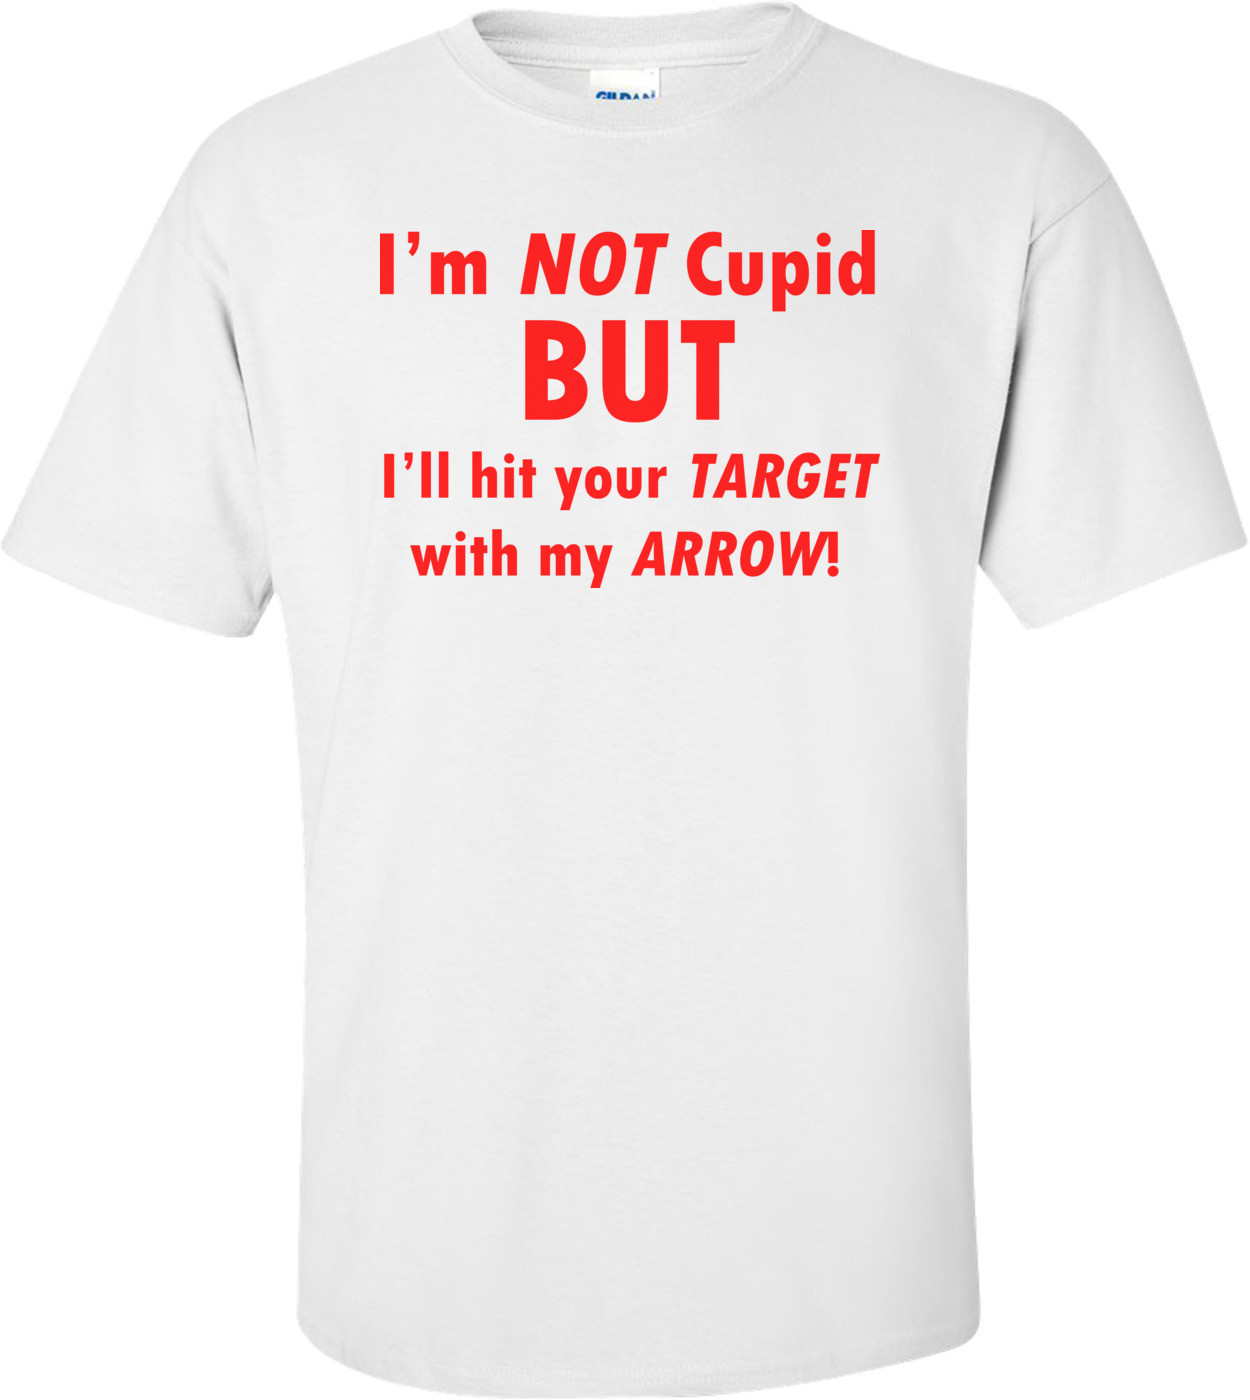 I'm Not Cupid But I'll Hit Your Target With My Arrow!  Funny Valentine's Day